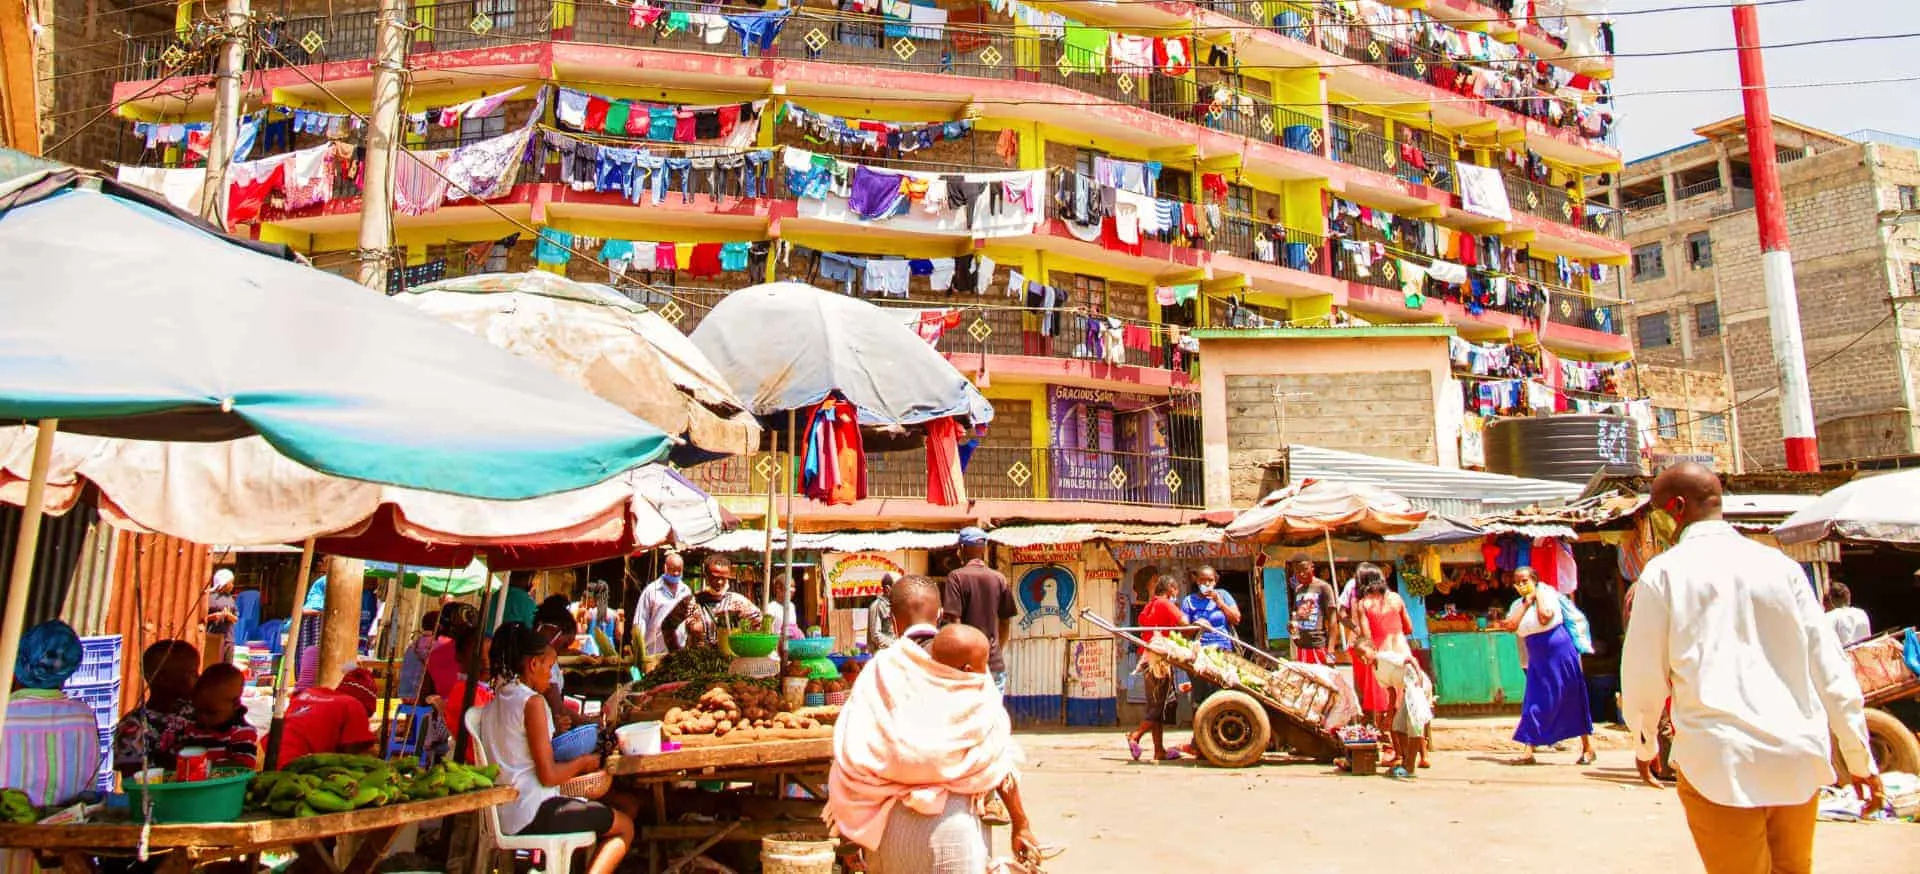 City Market in Kenya, africa | Shoes,Souvenirs,Accessories,Spices,Organic Food,Groceries,Clothes - Country Helper